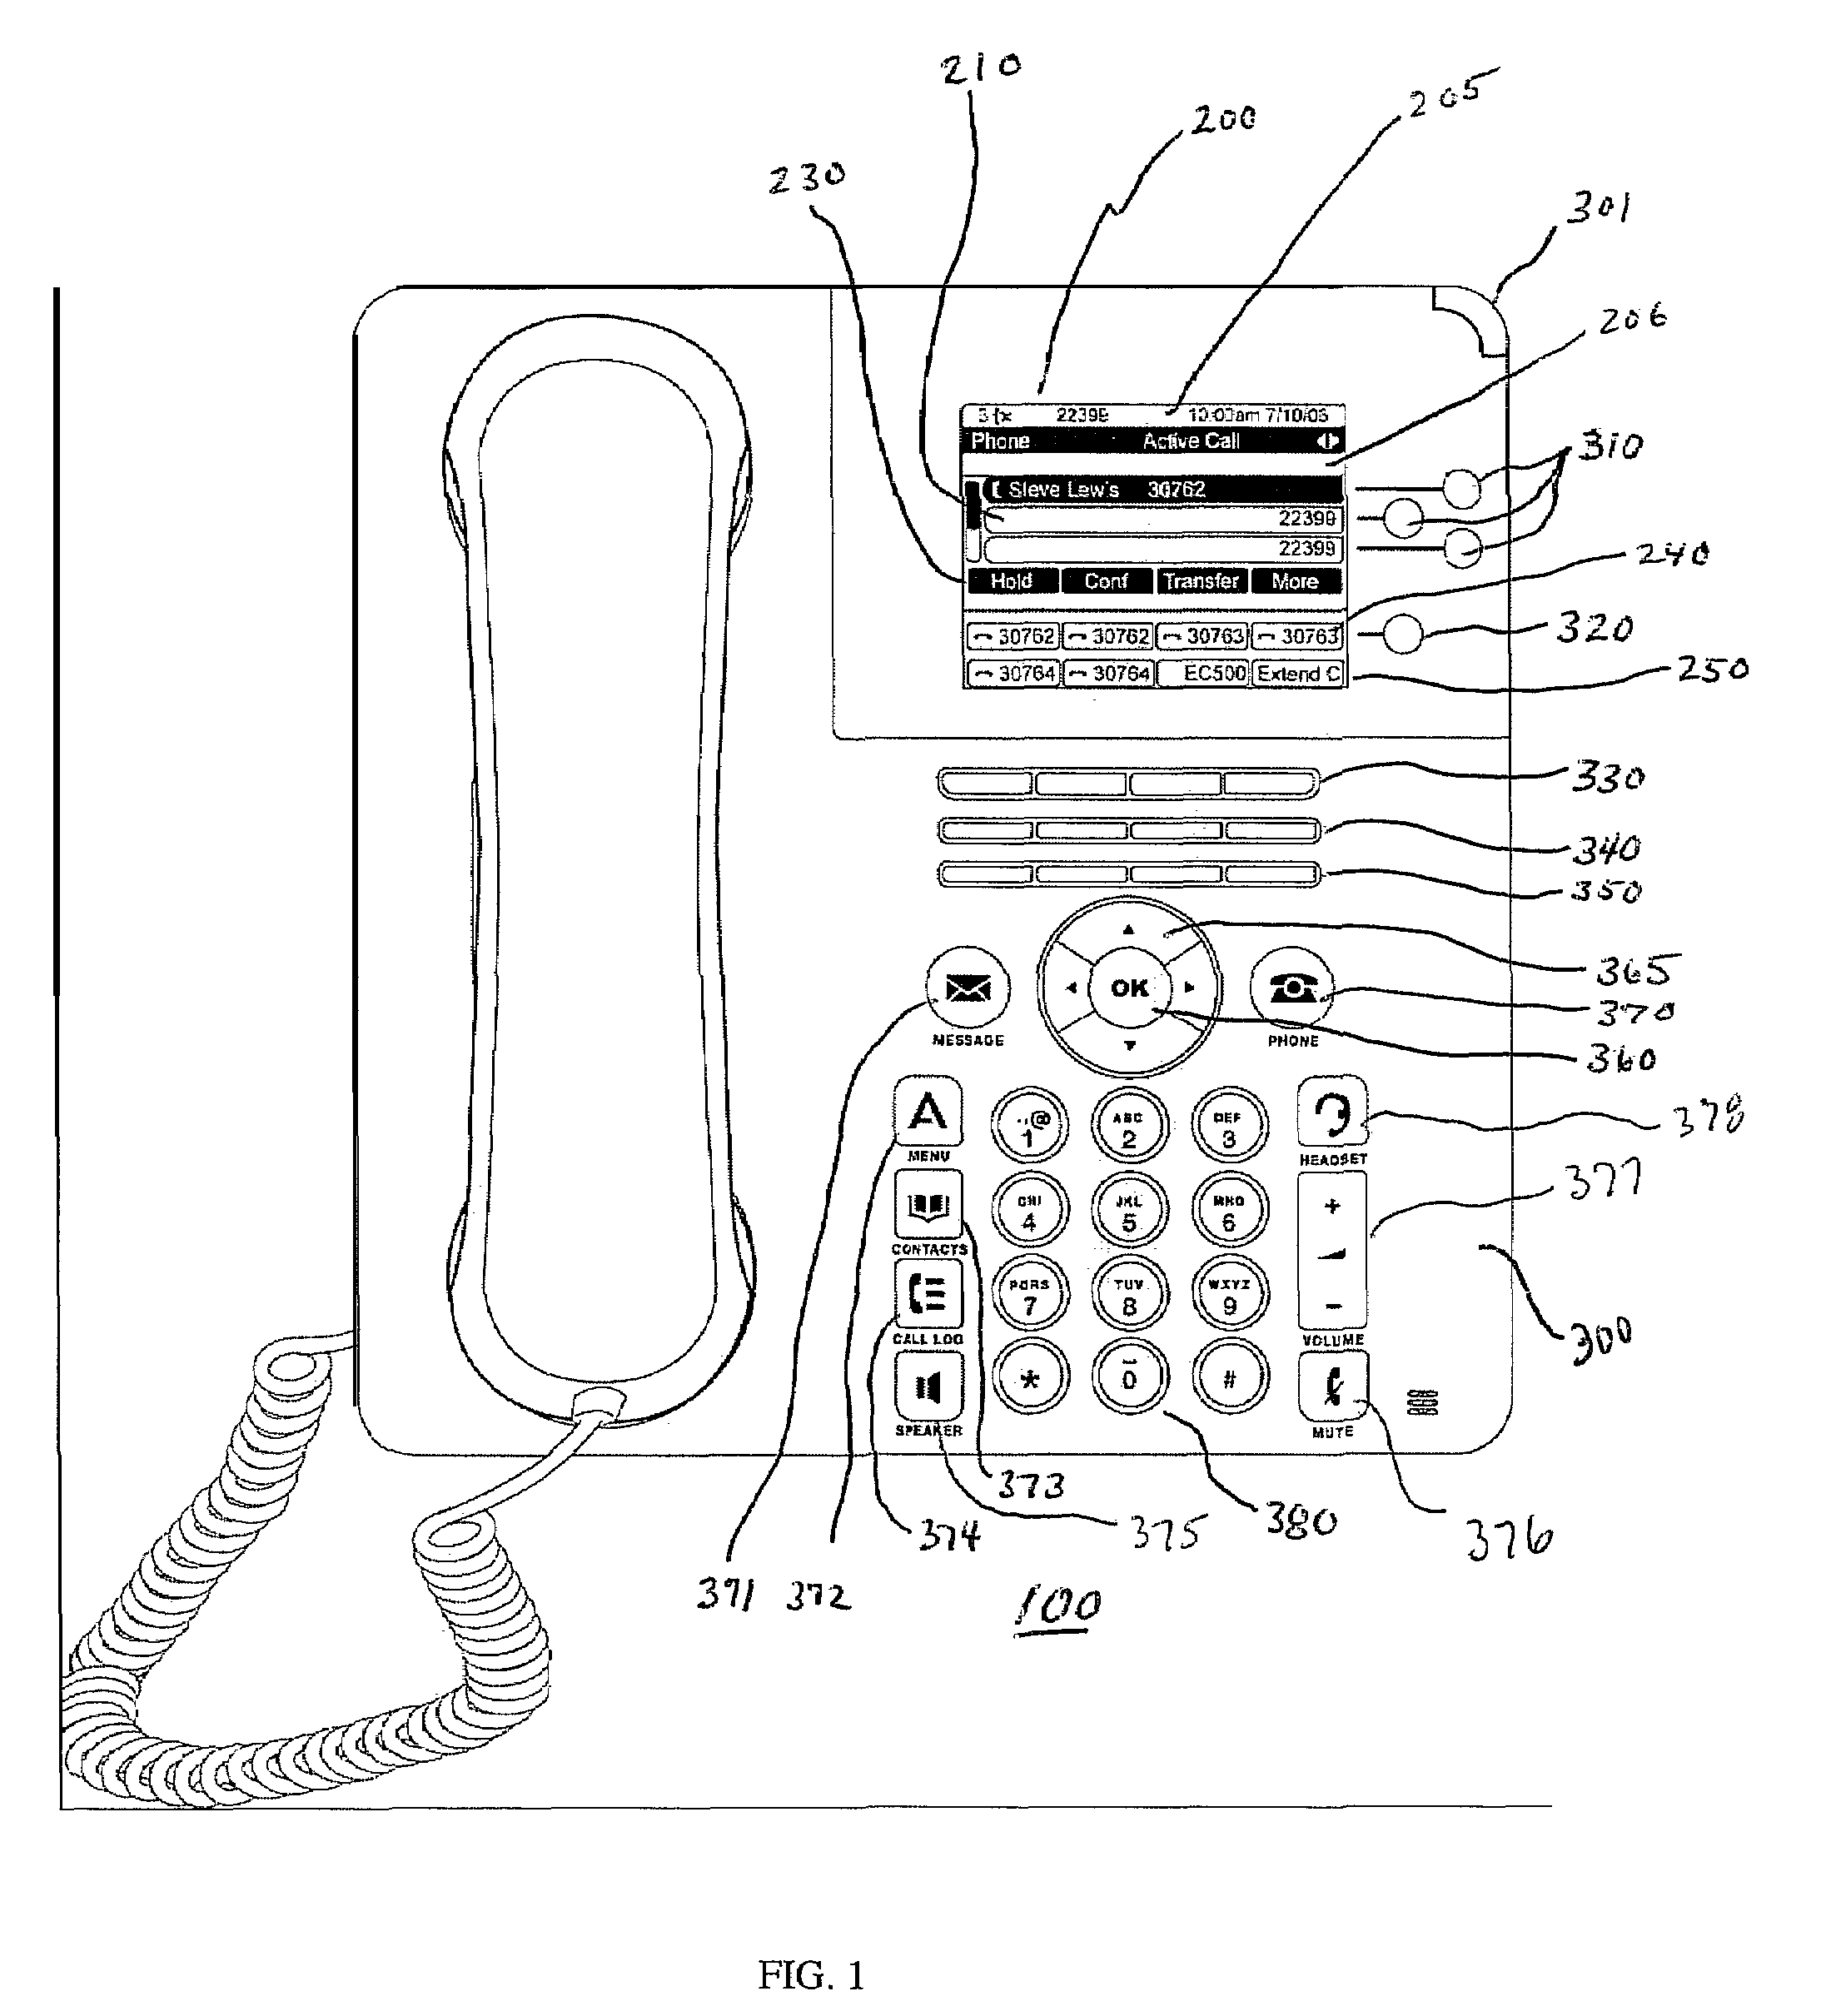 Telephone with enhanced function display and selection ability